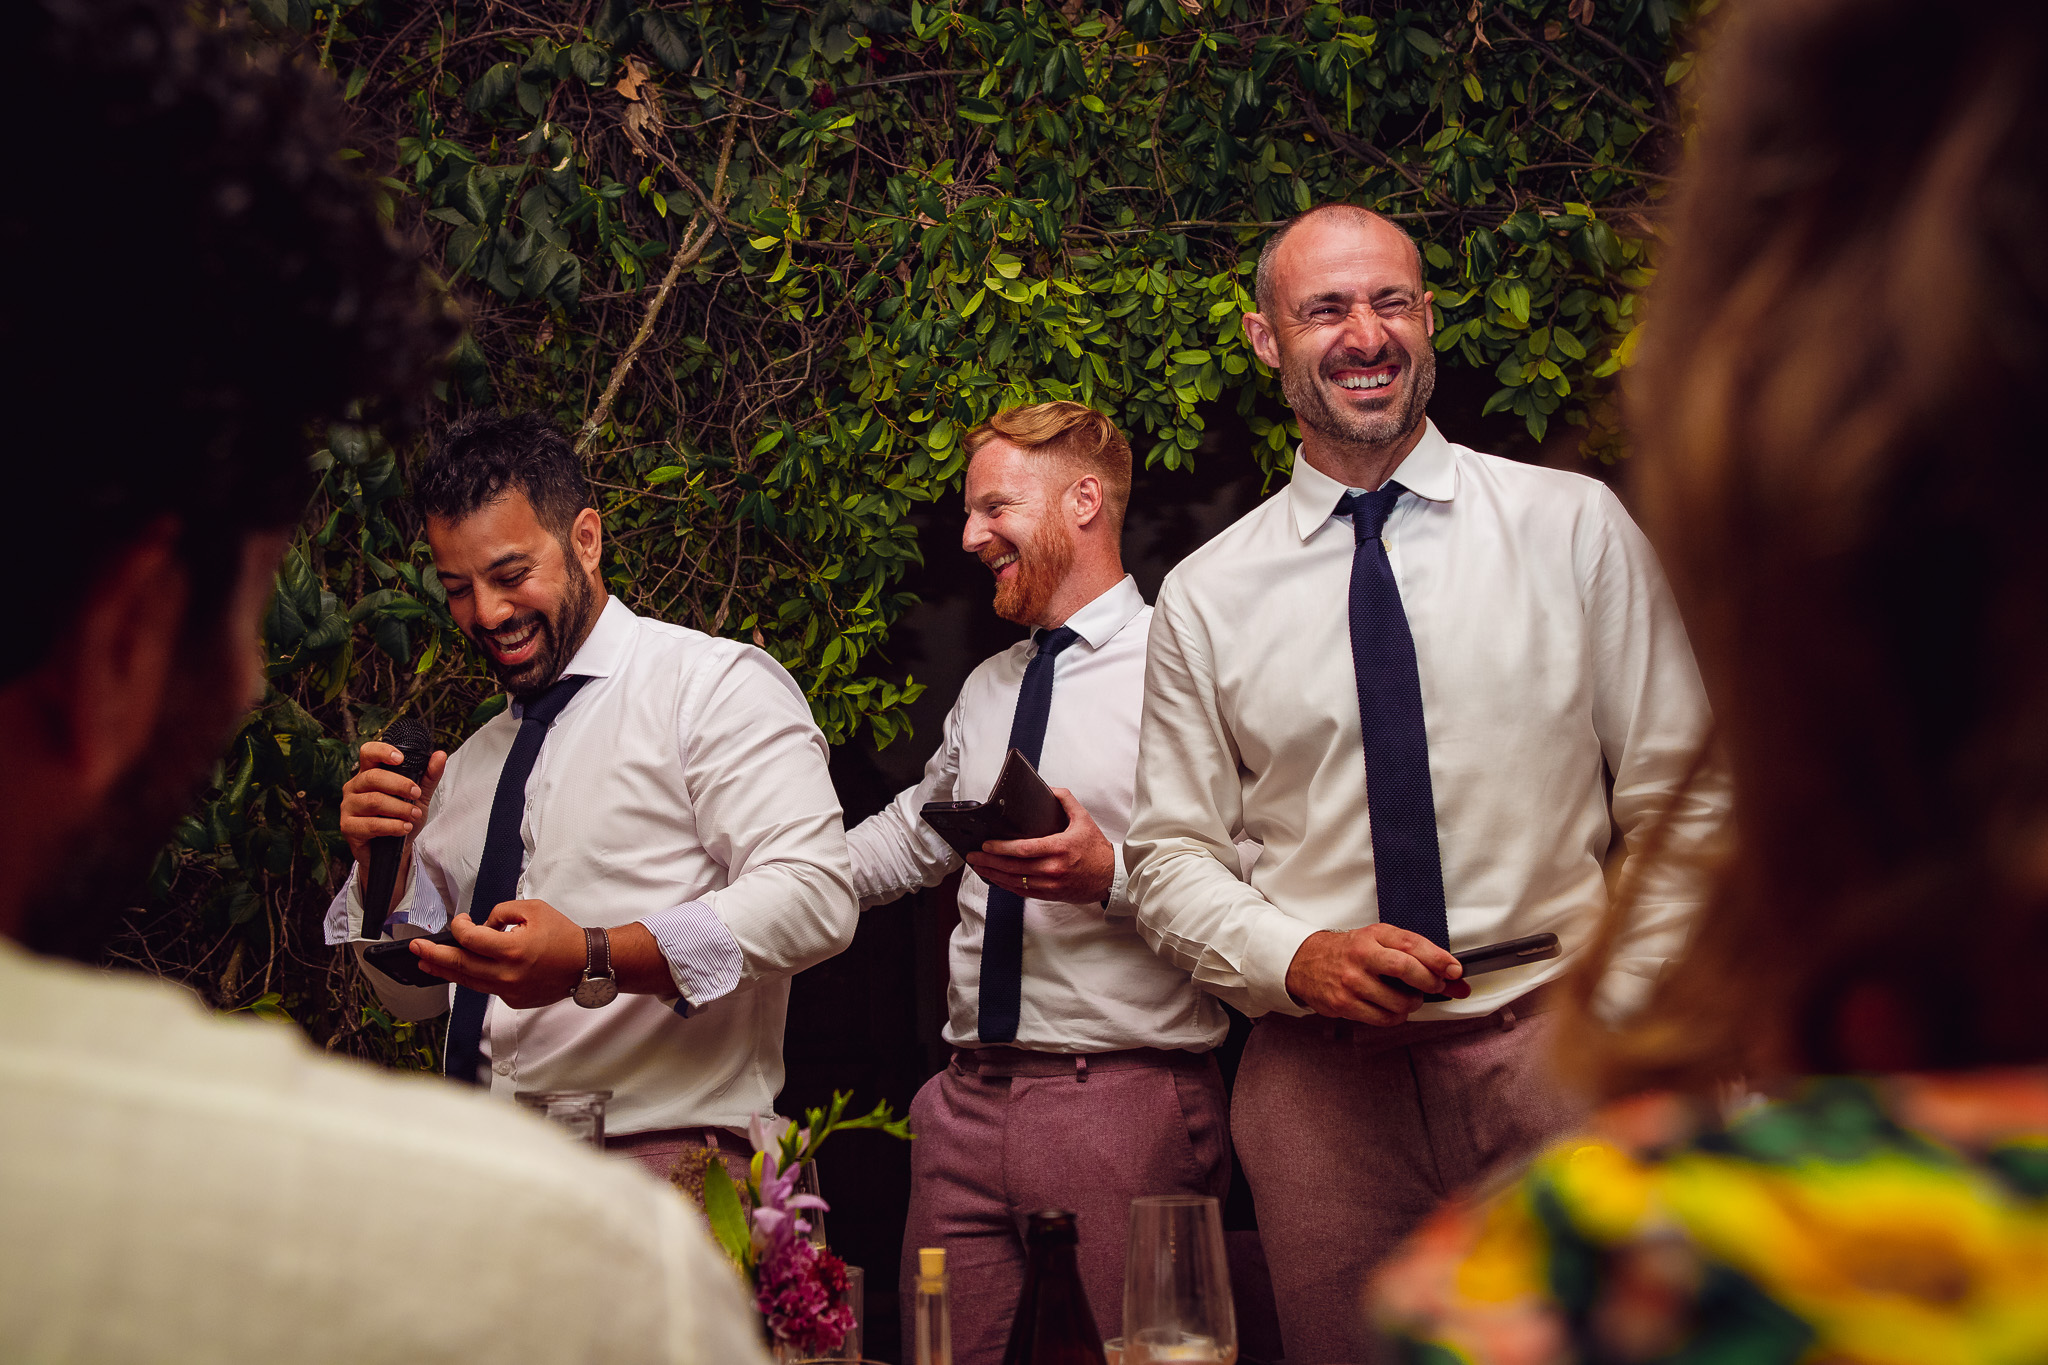 Three best men laugh as they stand to deliver their speech during a wedding dinner